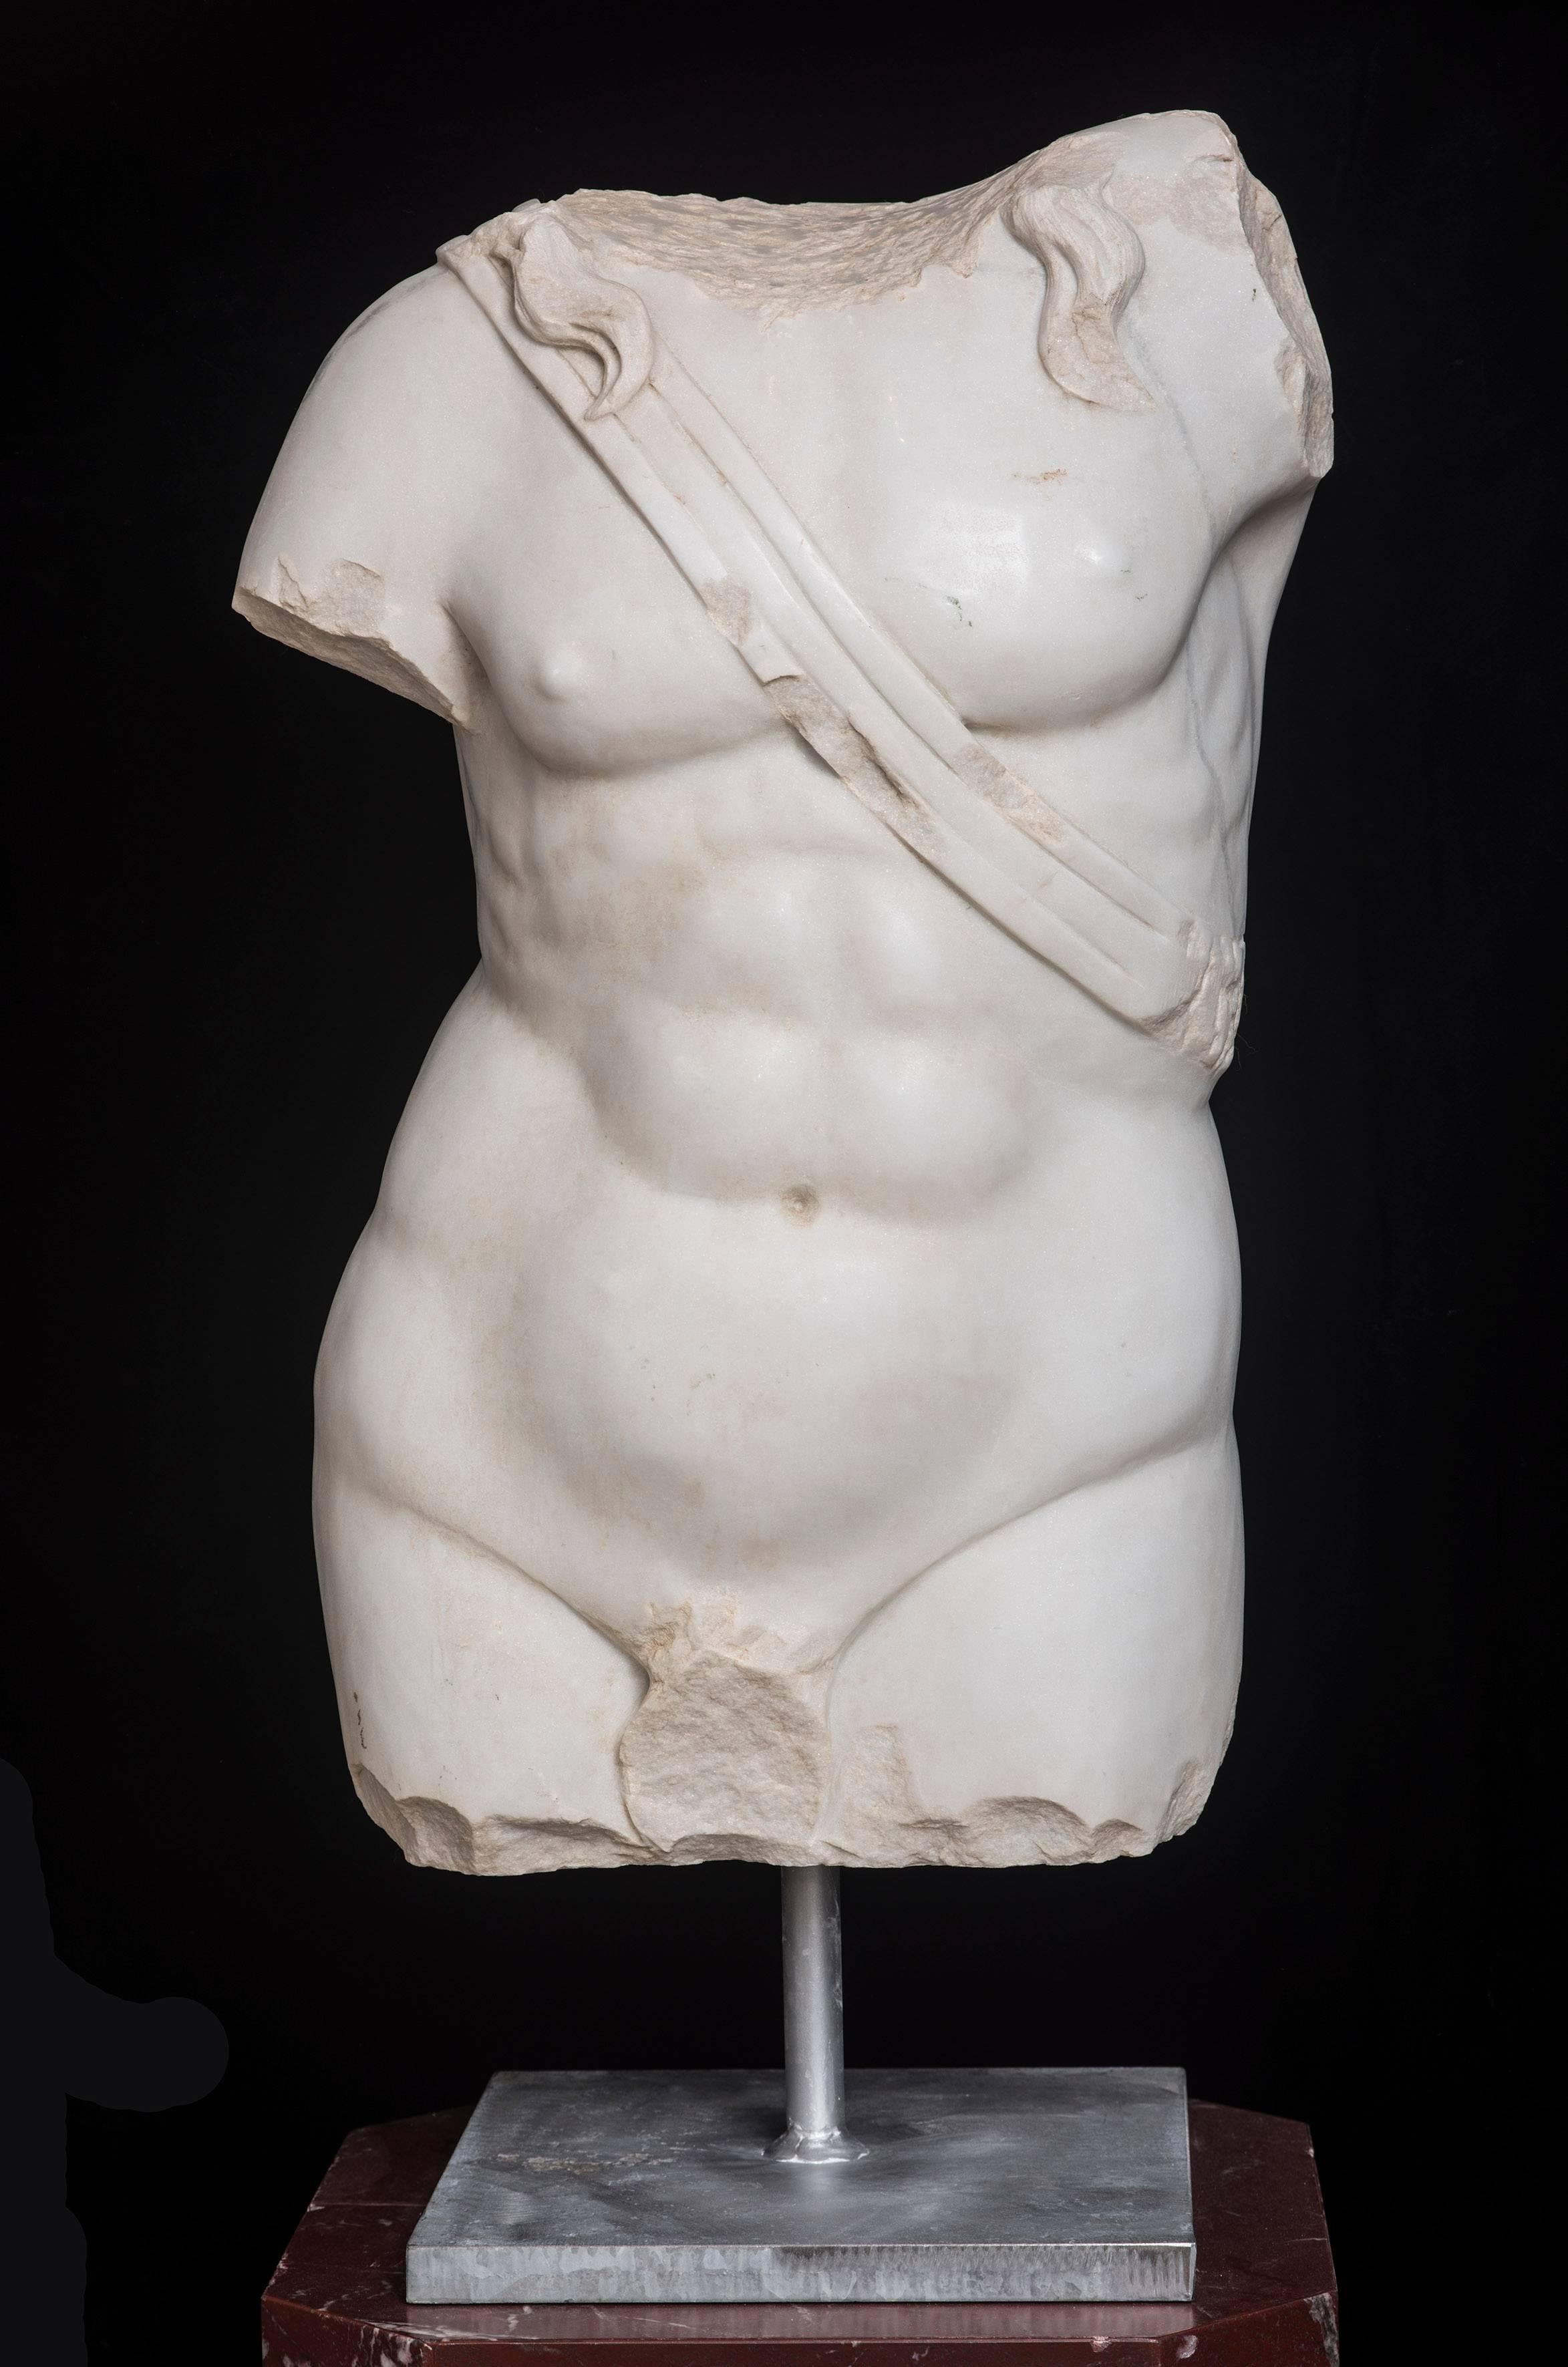 Once were romans, is the name of the collection that want to celebrate again the magnificence of ancient Roma. This superb torso, carved by the sculptor artist from the marble block, using the ancient and traditional technique of Compasso is